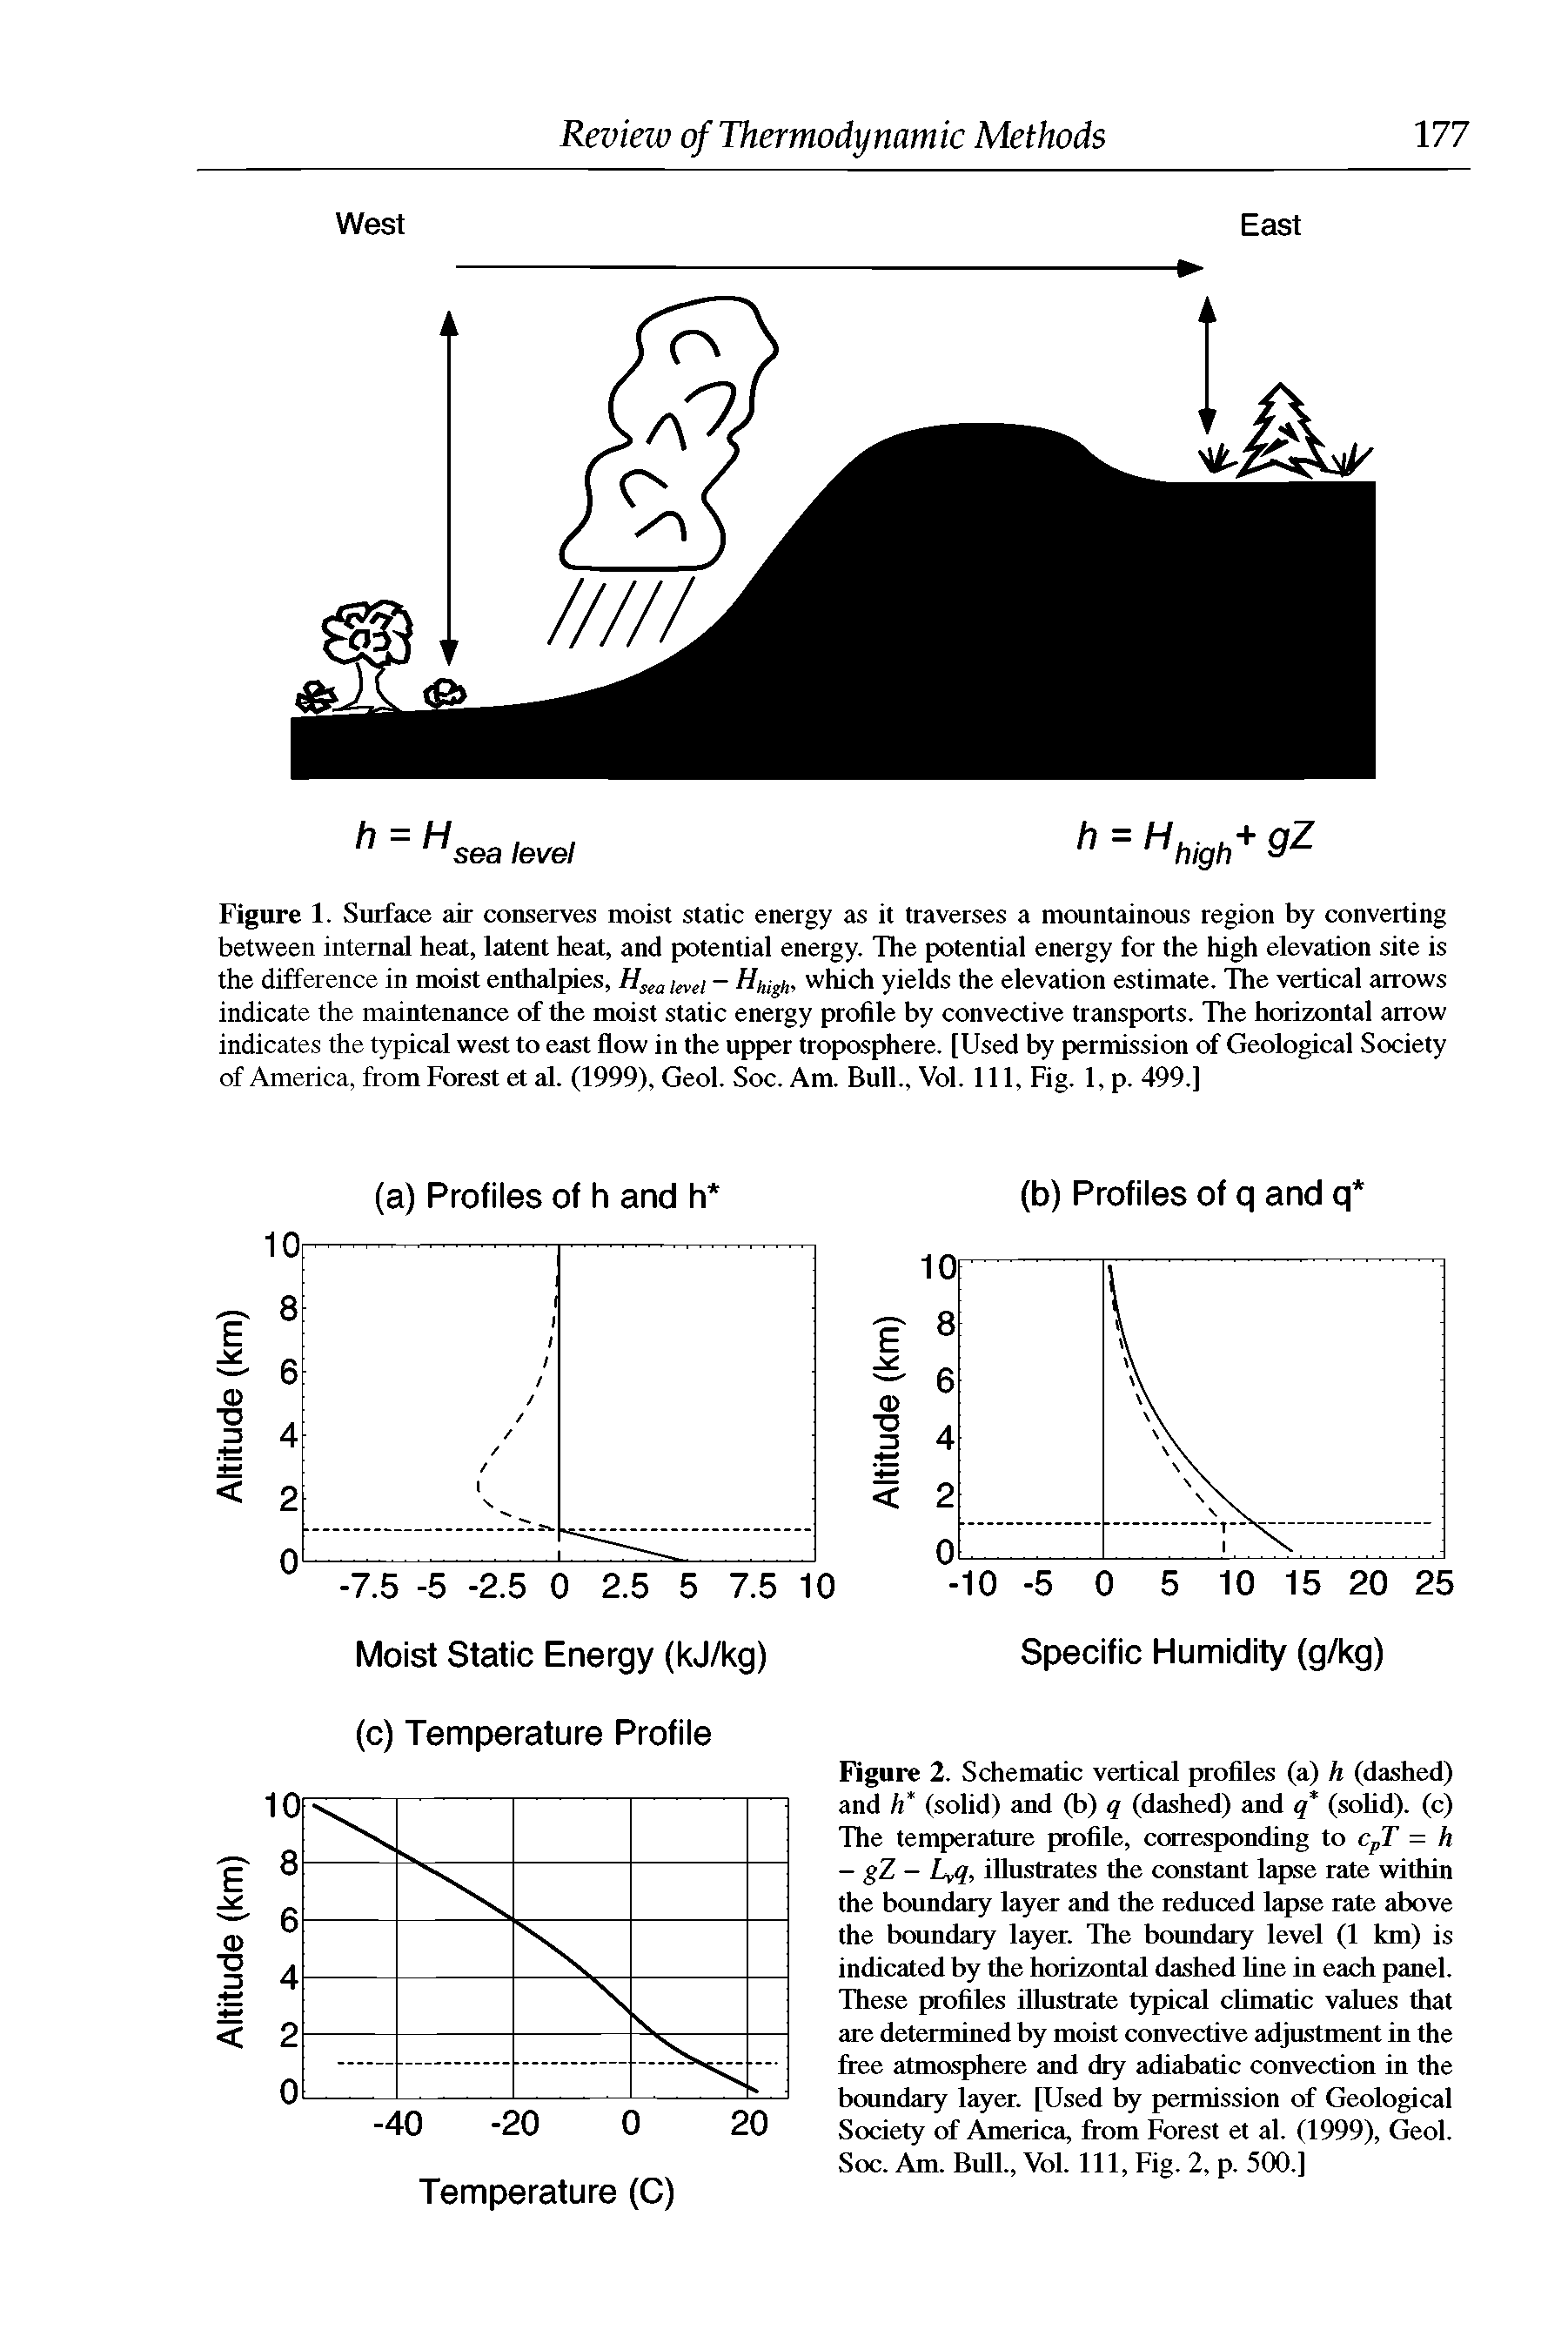 Figure 2. Schematic vertical profiles (a) h (dashed) and h (solid) and (b) q (dashed) and q (solid), (c) The temperature profile, corresponding to cpT = h — gZ — Lyq, illustrates die constant lapse rate within the boundary layer and the reduced lapse rate above the boundary layer. The boundary level (1 km) is indicated by die horizontal dashed line in each panel. These profiles illustrate typical climatic values that are determined by moist convective adjustment in the free atmosphere and dry adiabatic convection in the boundary layer. [Used by permission of Geological Society of America, from Forest et al. (1999), Geol. Soc. Am. Bull., Vol. Ill, Fig. 2, p. 500.]...